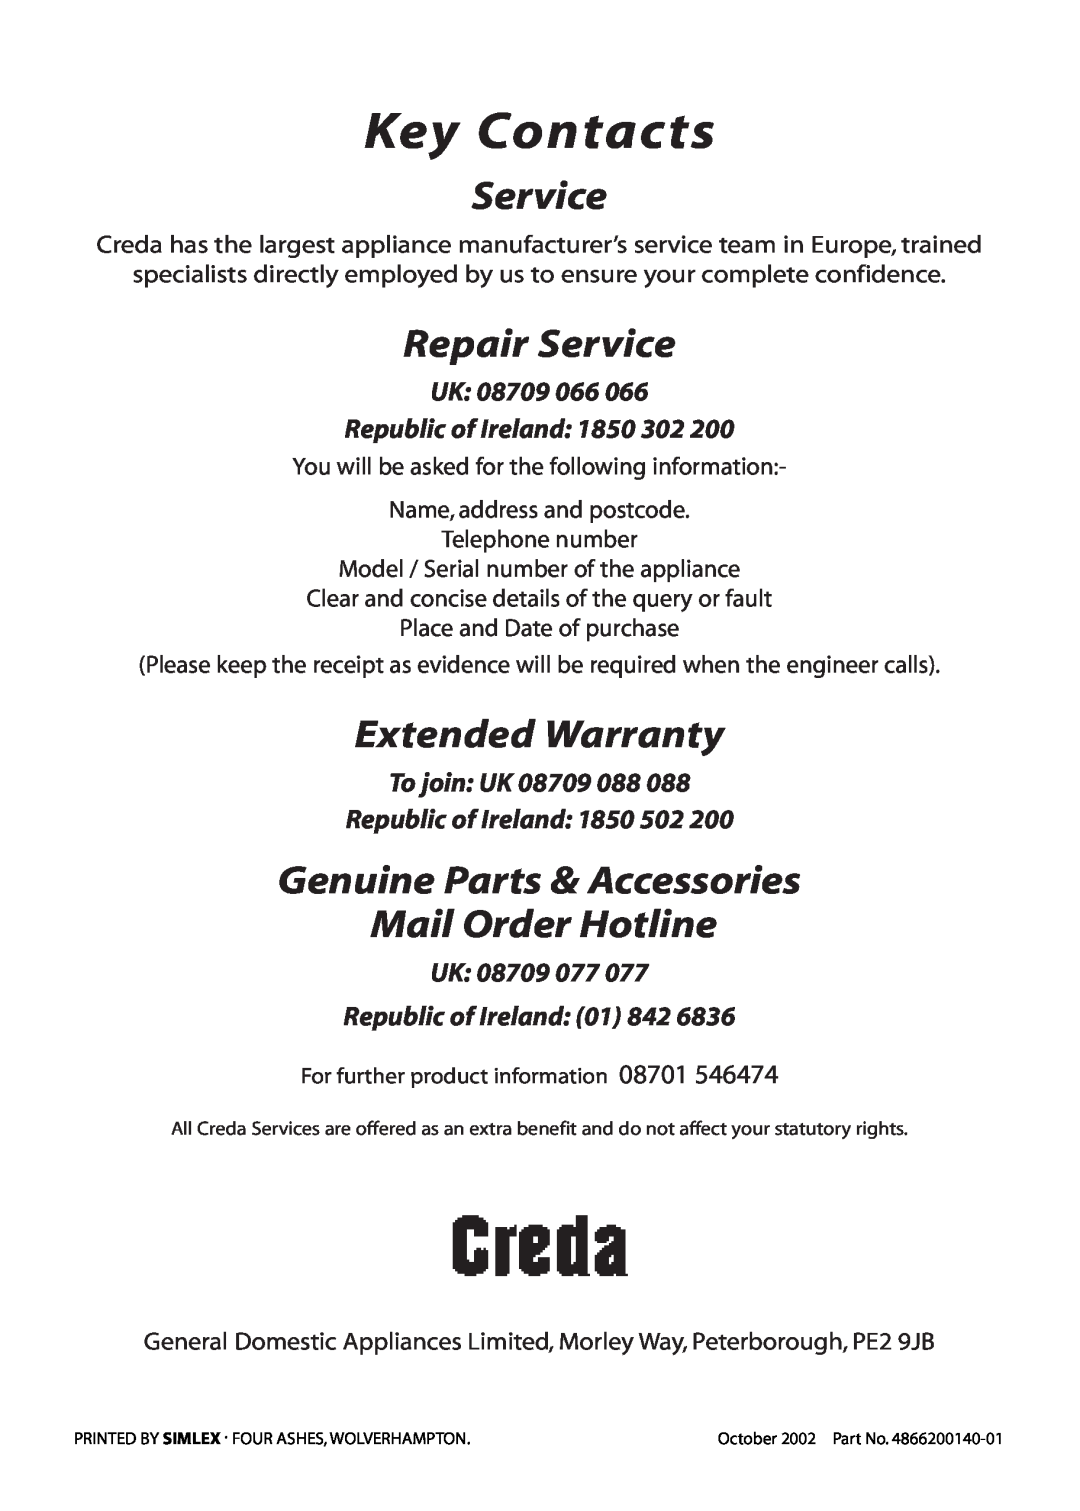 Creda C561E/R561E Key Contacts, Repair Service, Extended Warranty, Genuine Parts & Accessories Mail Order Hotline 